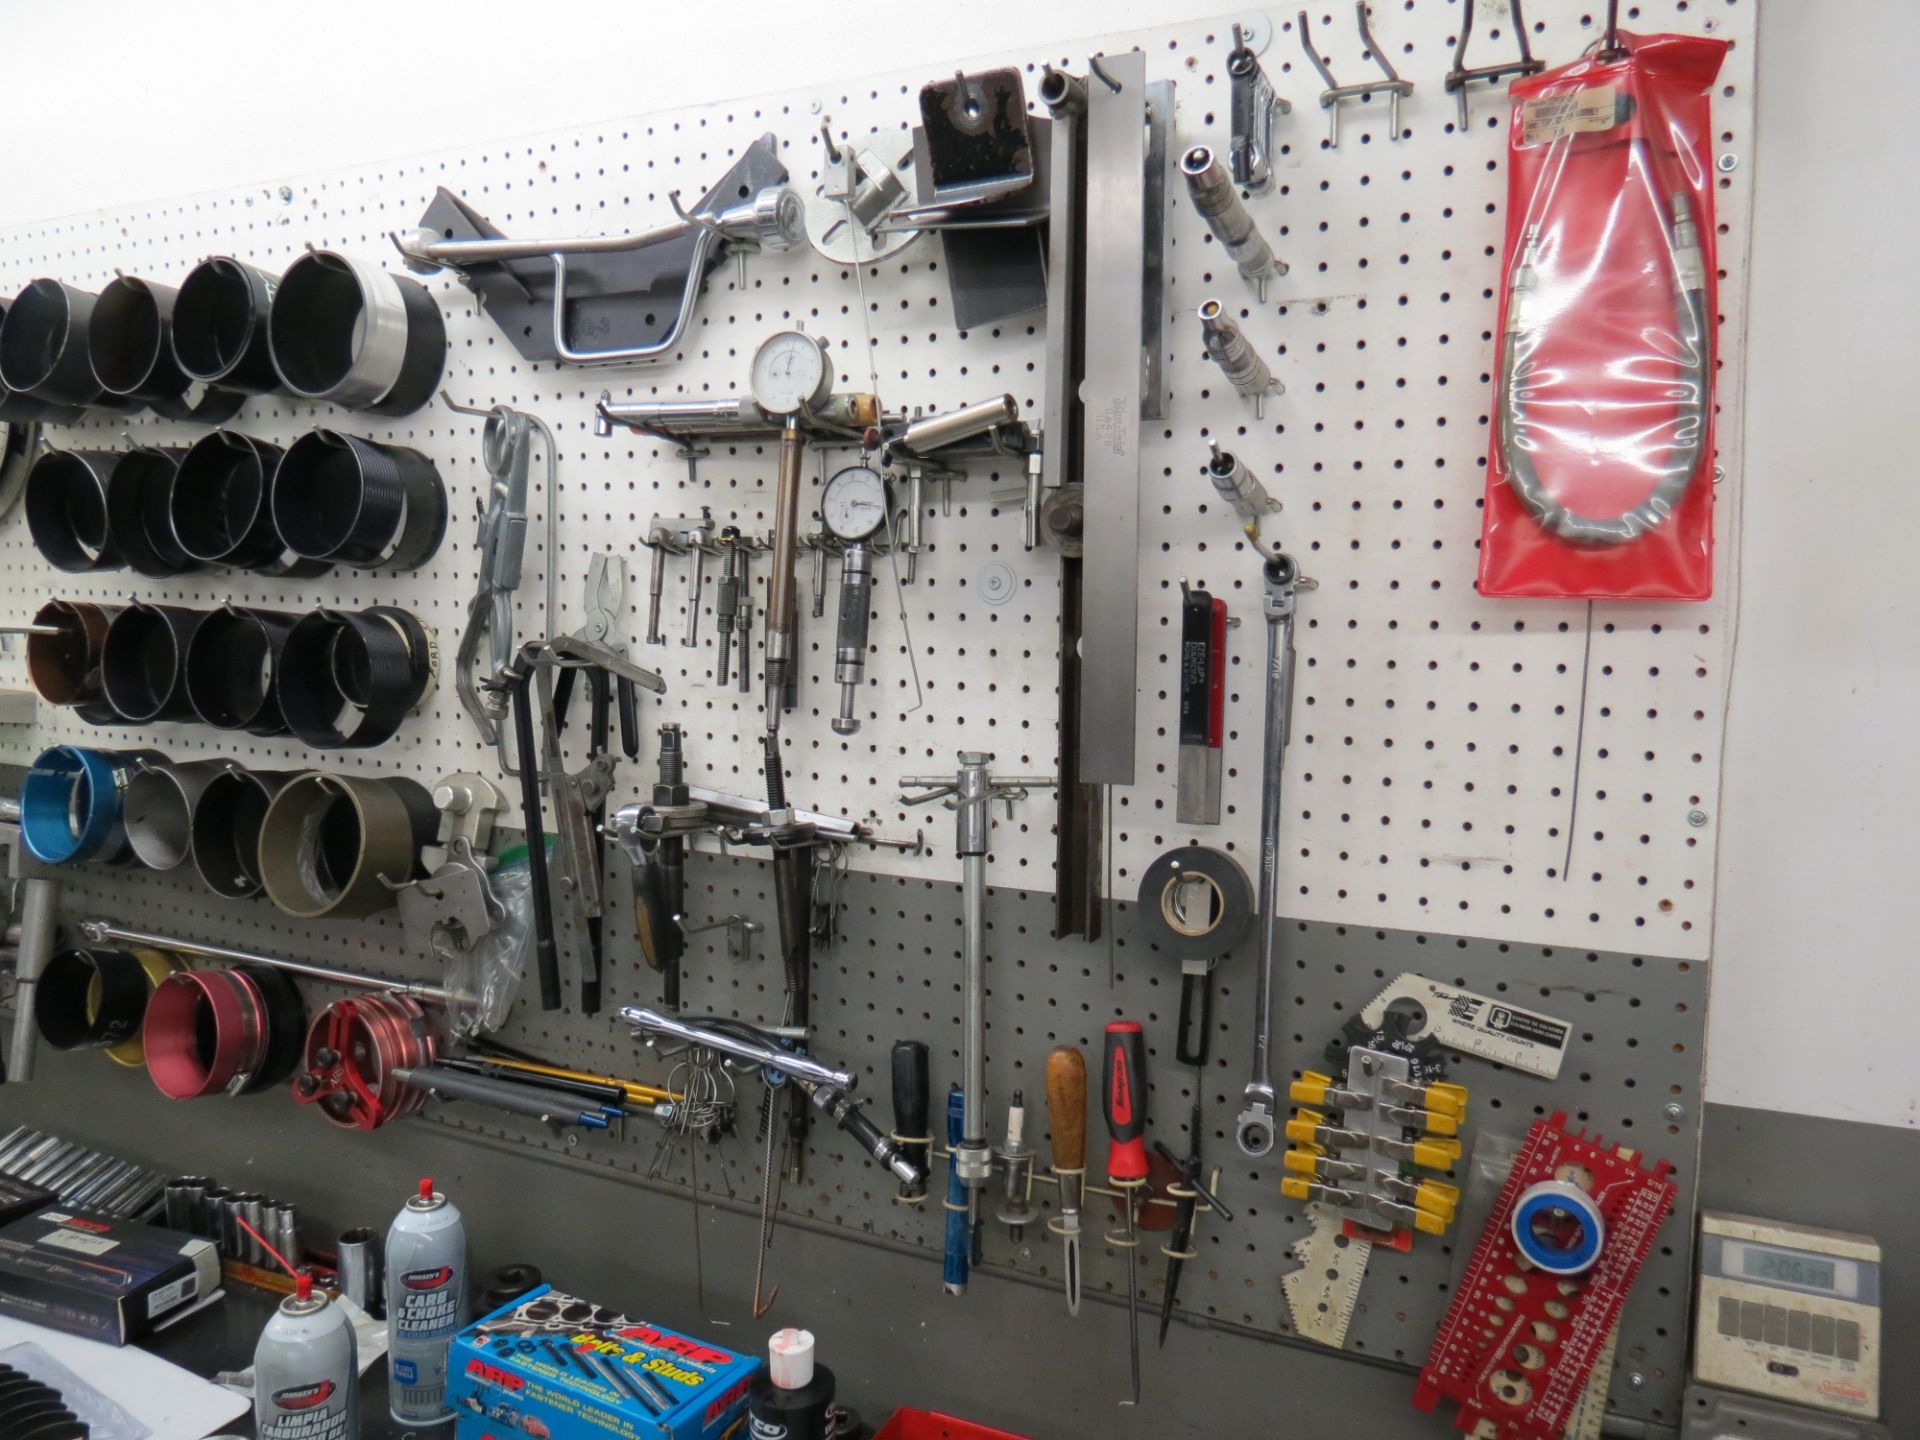 LOT OF ASSORTED TOOLS, CAM CHECKING TOOLS, SCREW DRIVERS, RATCHETS, SOCKETS, WRENCHES, CENTER - Image 4 of 6